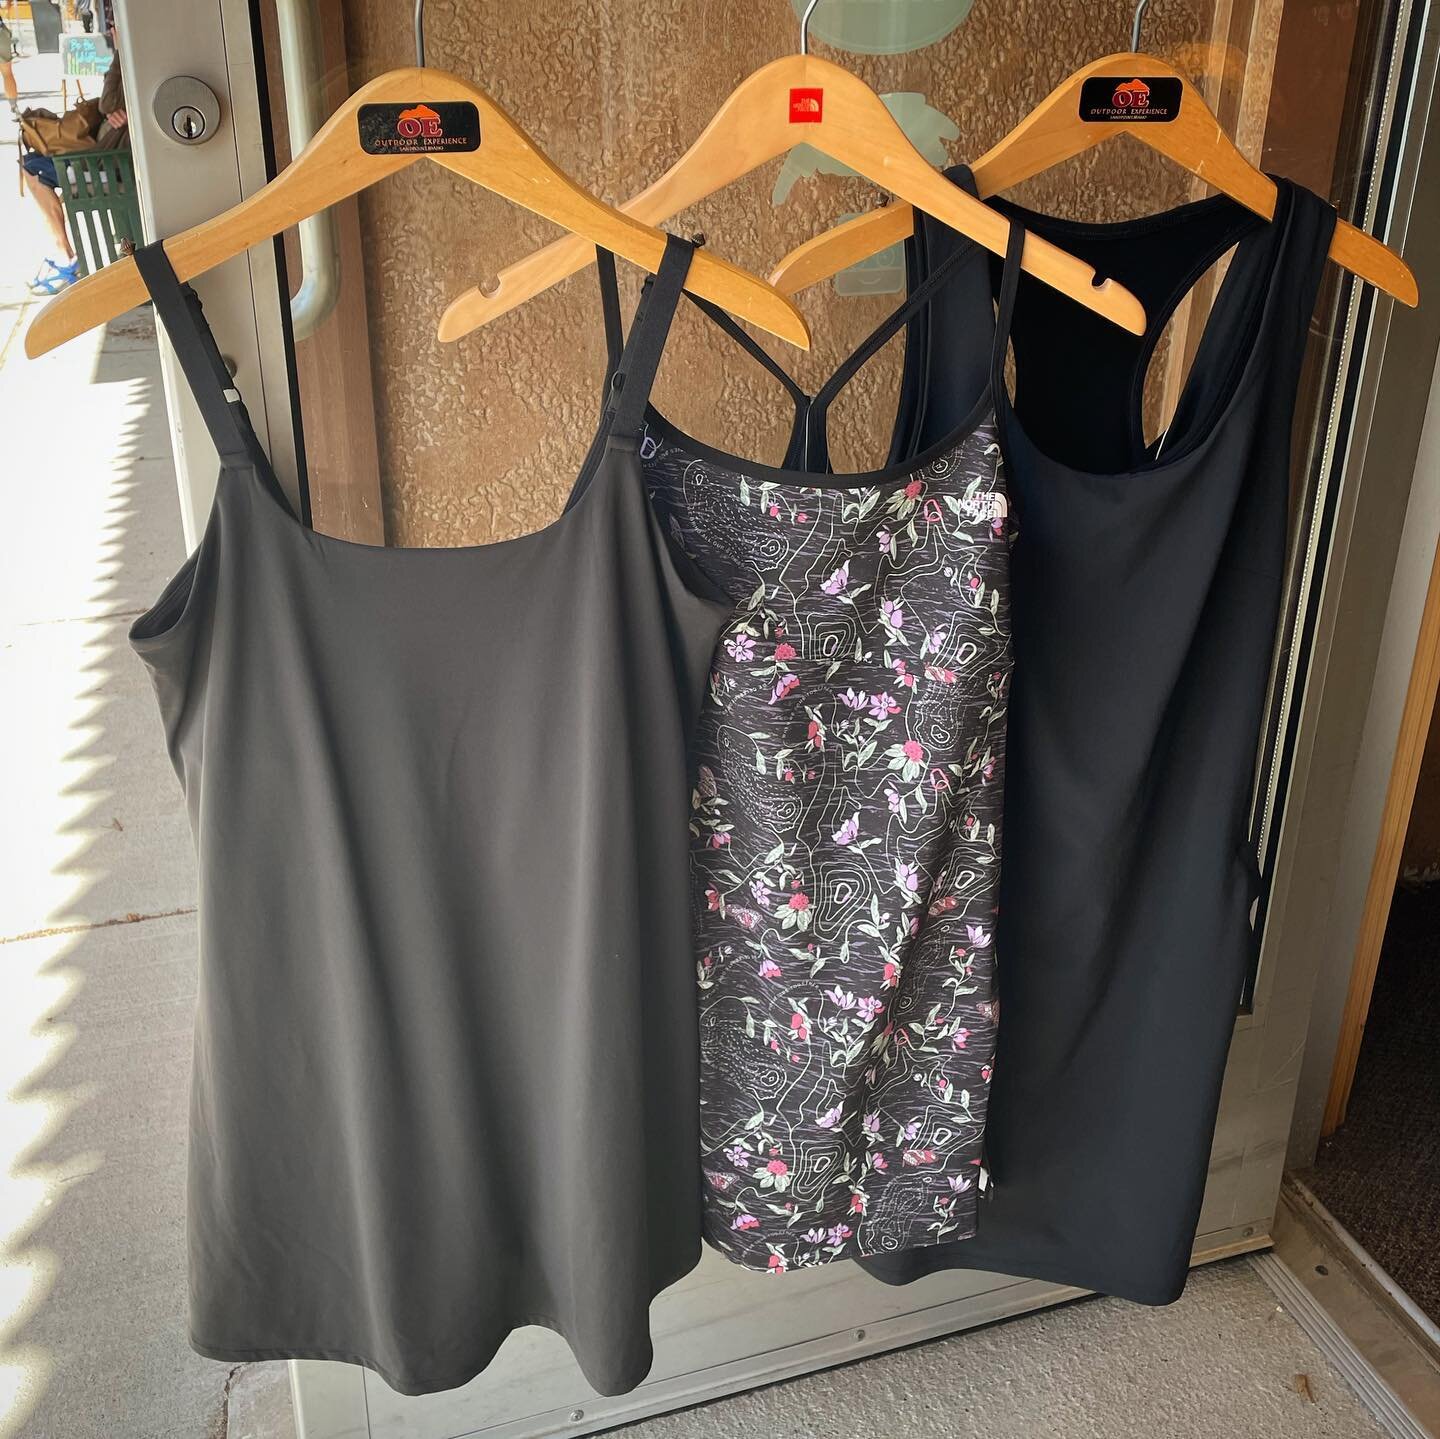 Sport Dresses Galore! These quick-drying dresses have incorporated shorts with hidden pockets so you can run, hike, dance, boat, etc.